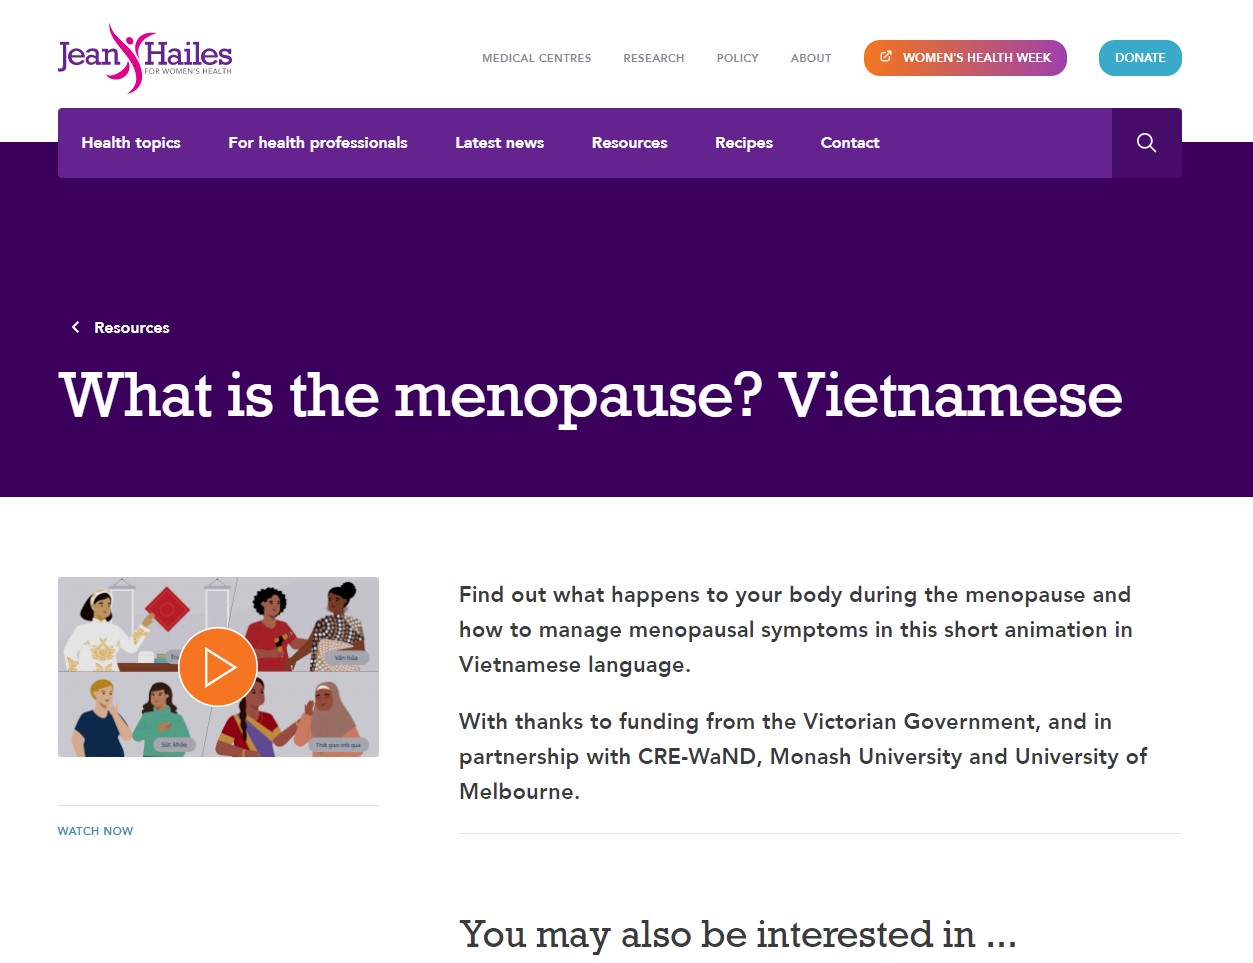 Jean Hailes - What is the menopause? (Vietnamese) thumbnail